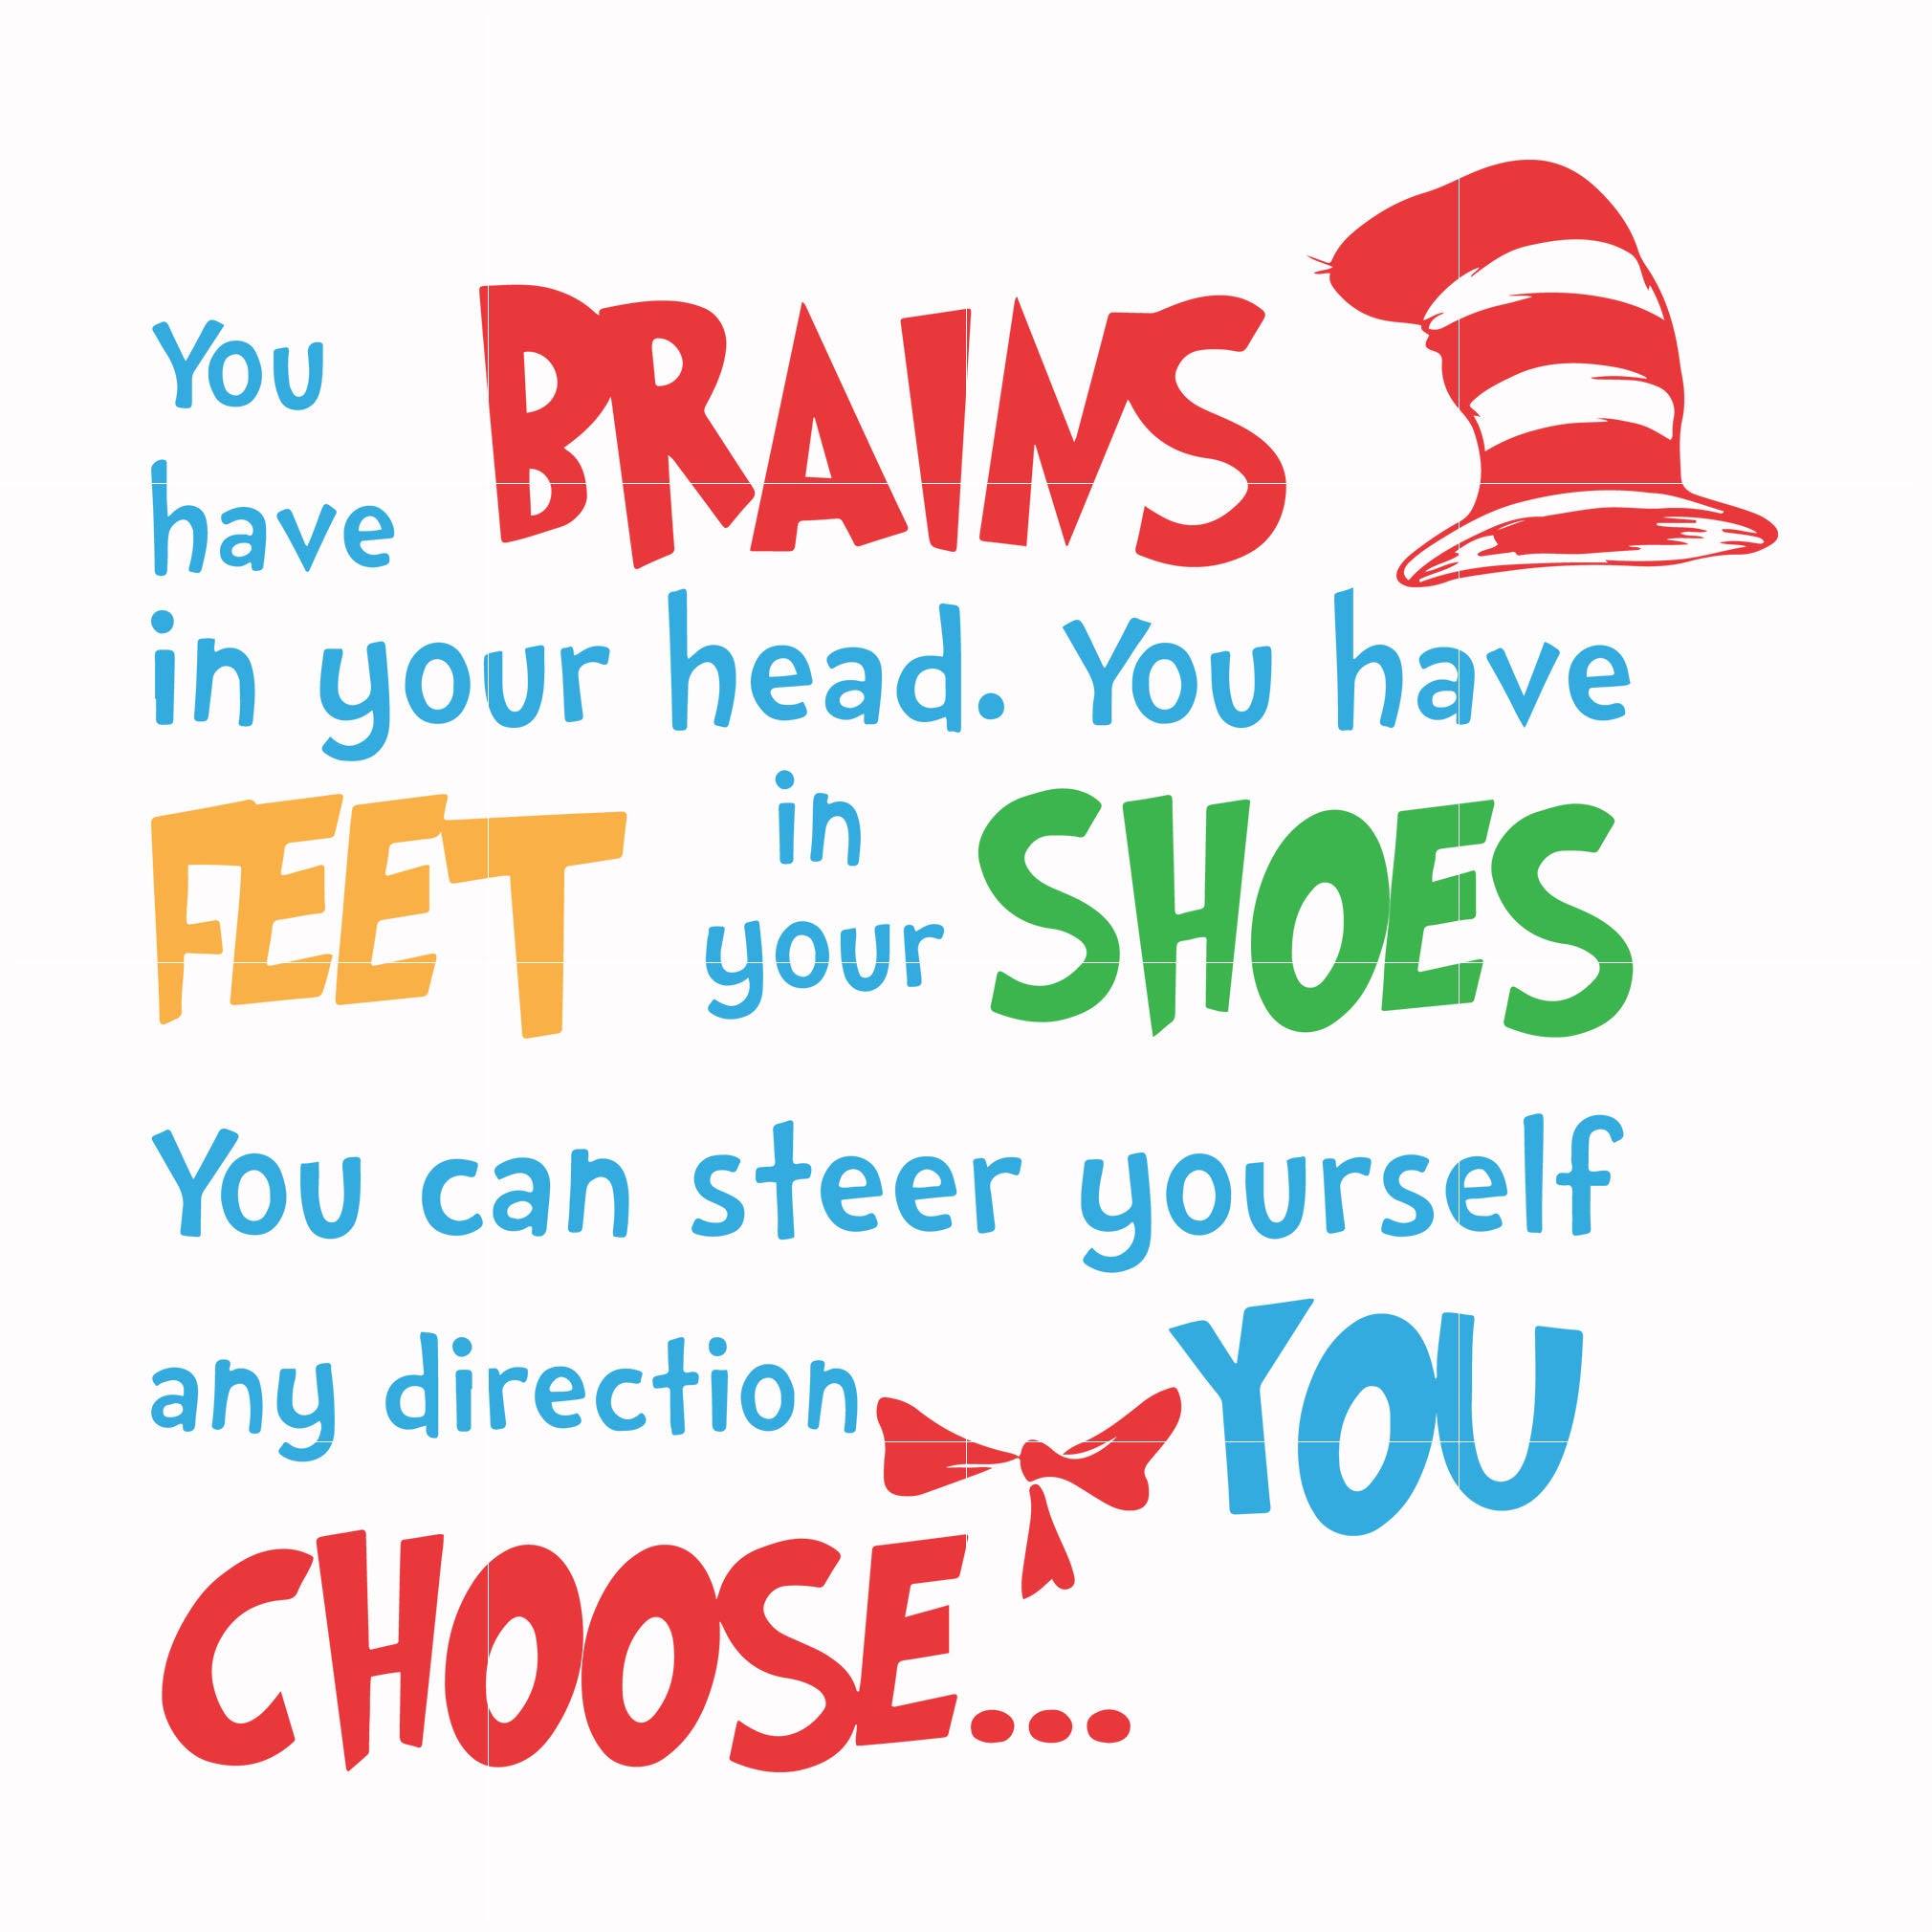 You have brains in your head you have feet in your shoes you can steer